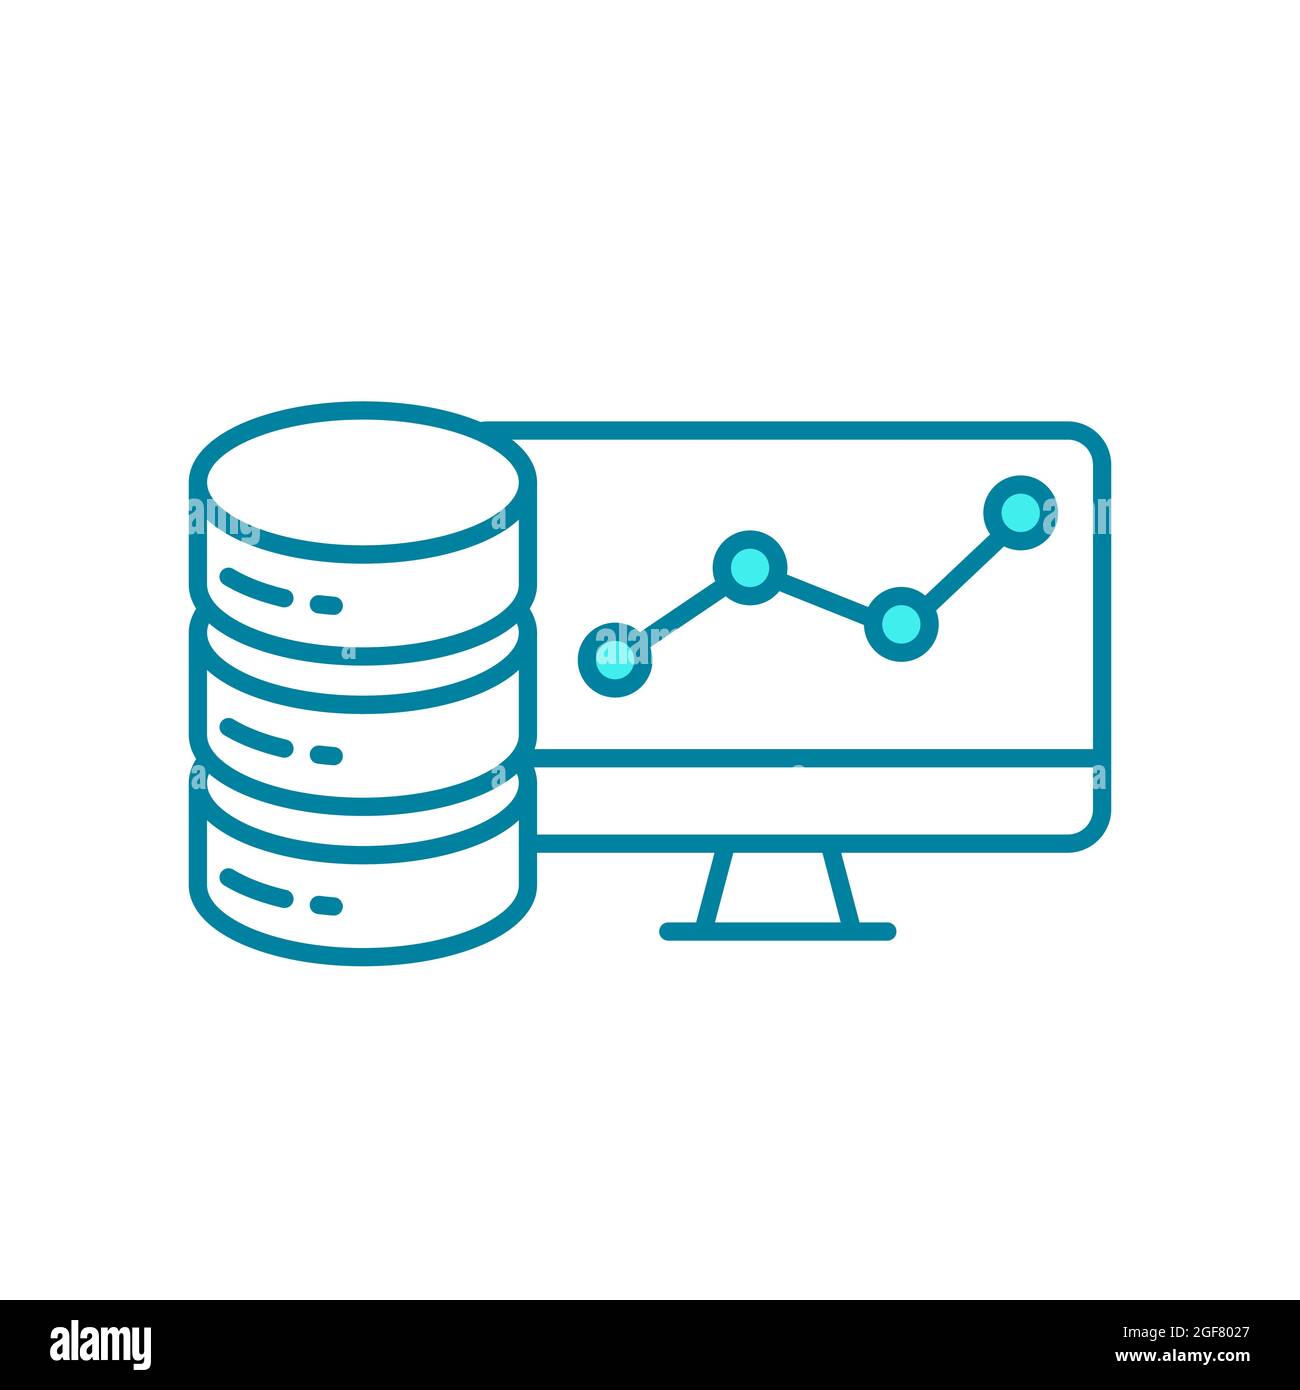 Big data framework line icon. Database server and personal computer. Data architecture network. Information storage. Volume, variety, velocity. Vector Stock Vector